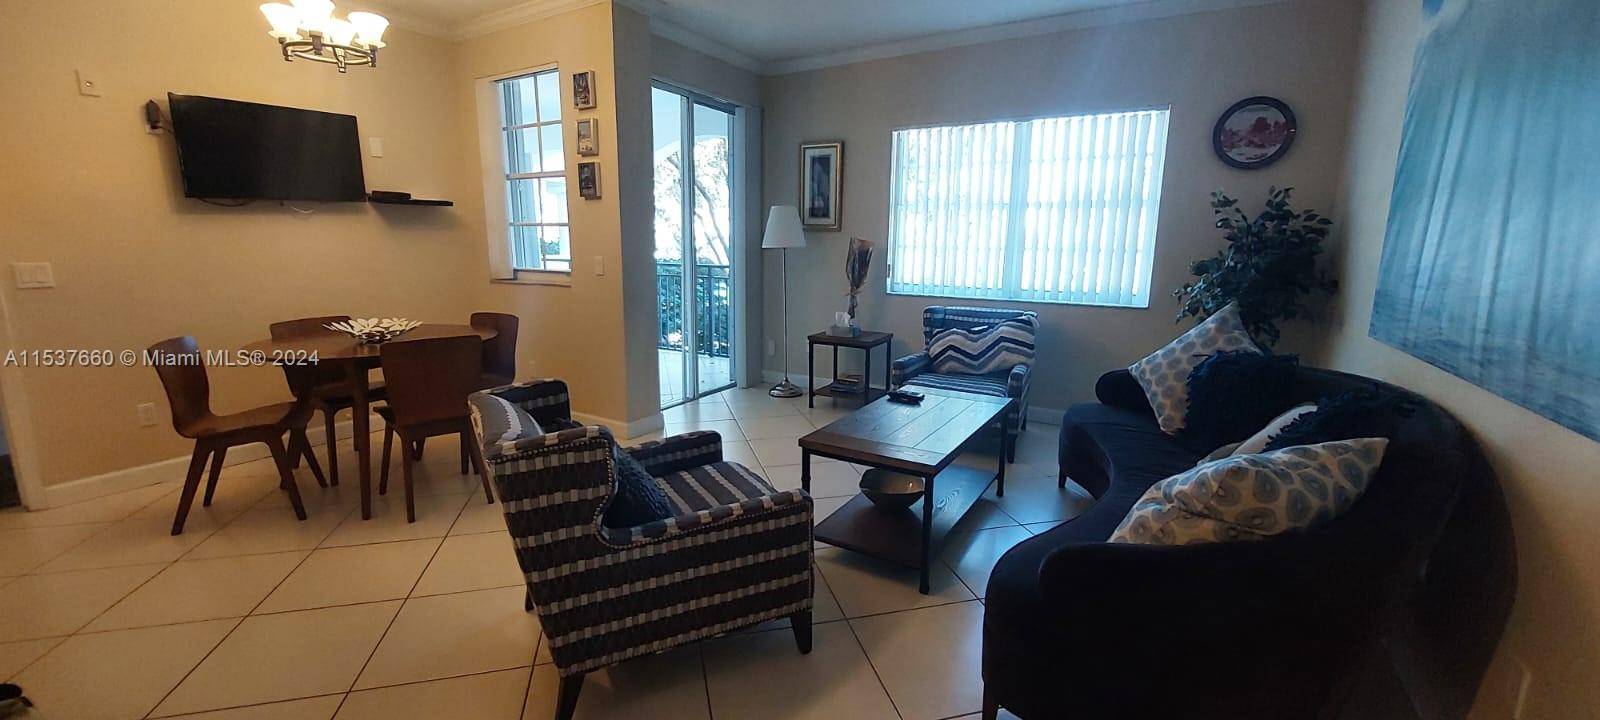 Fully furnished 2 bedroom unit in desirable building with a nice view Can be rented furnished or unfurnished Also available for short term rent 3 month minimum 4000.